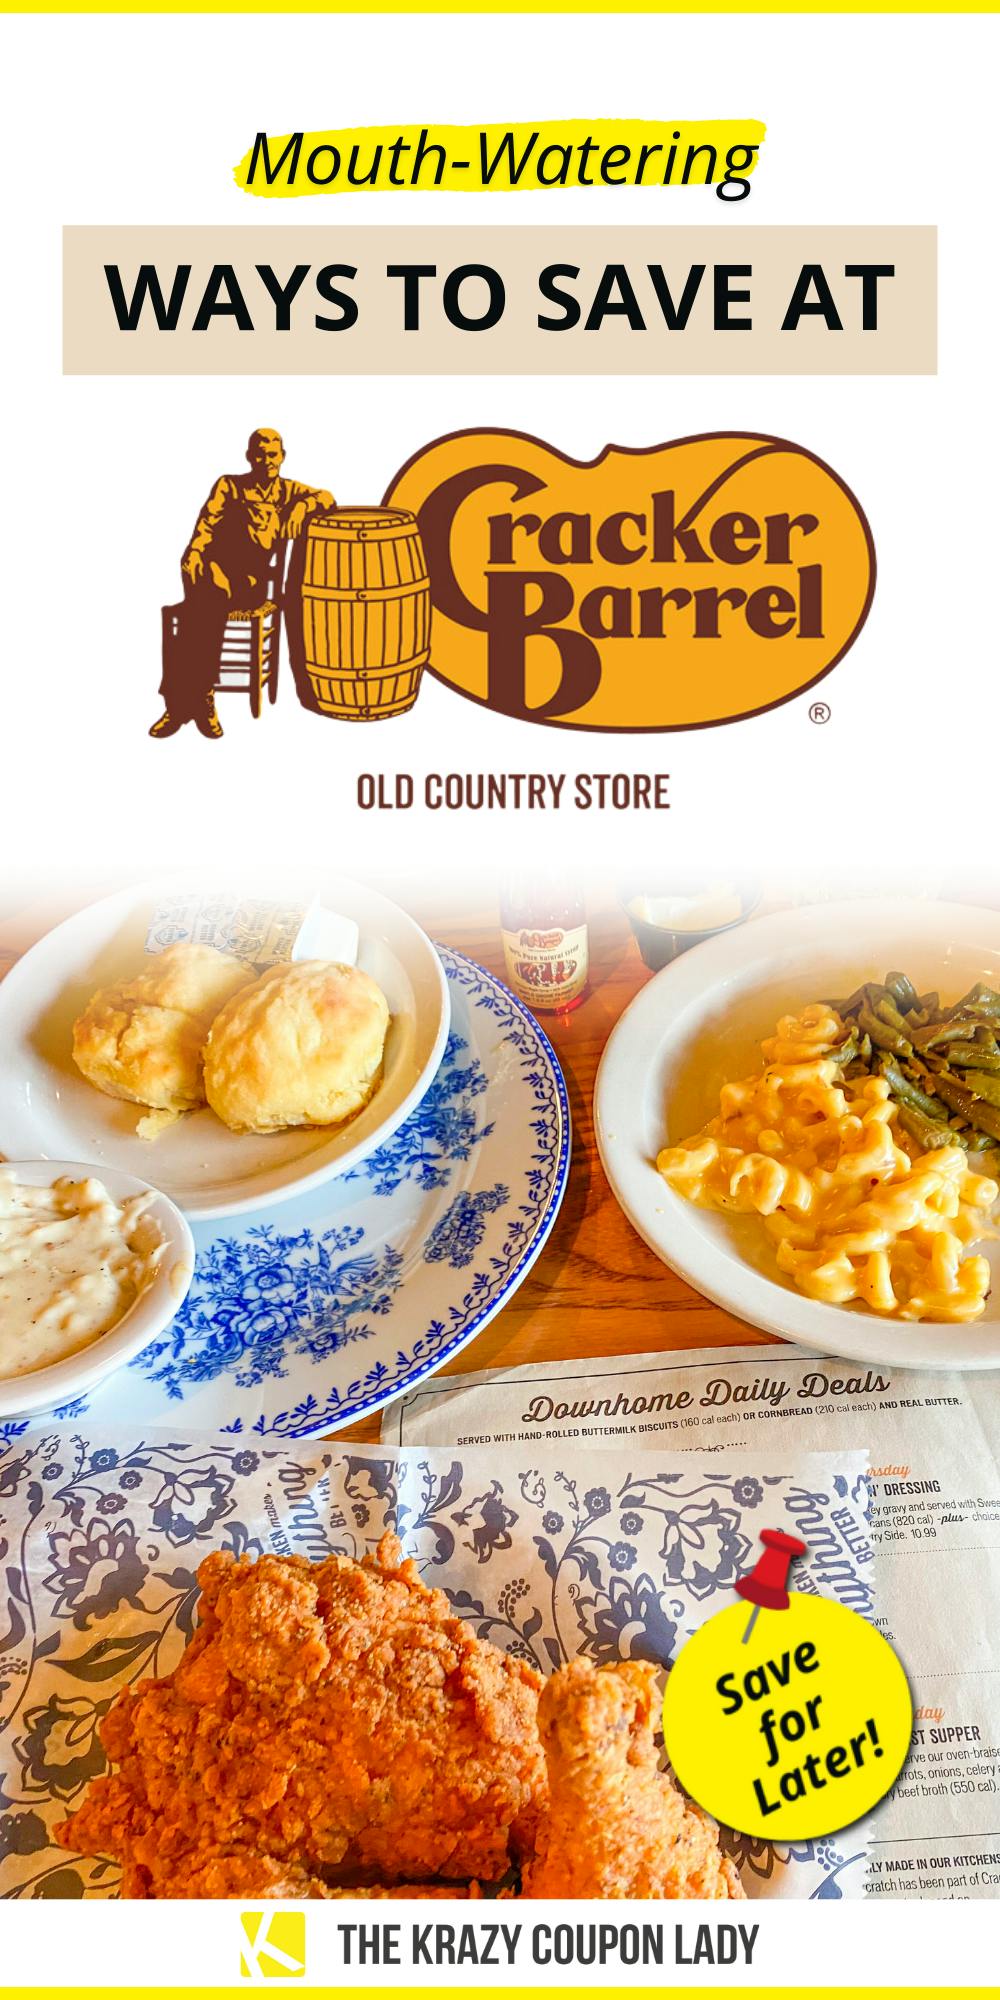 22 Mouth-Watering Ways to Save on the Cracker Barrel Menu